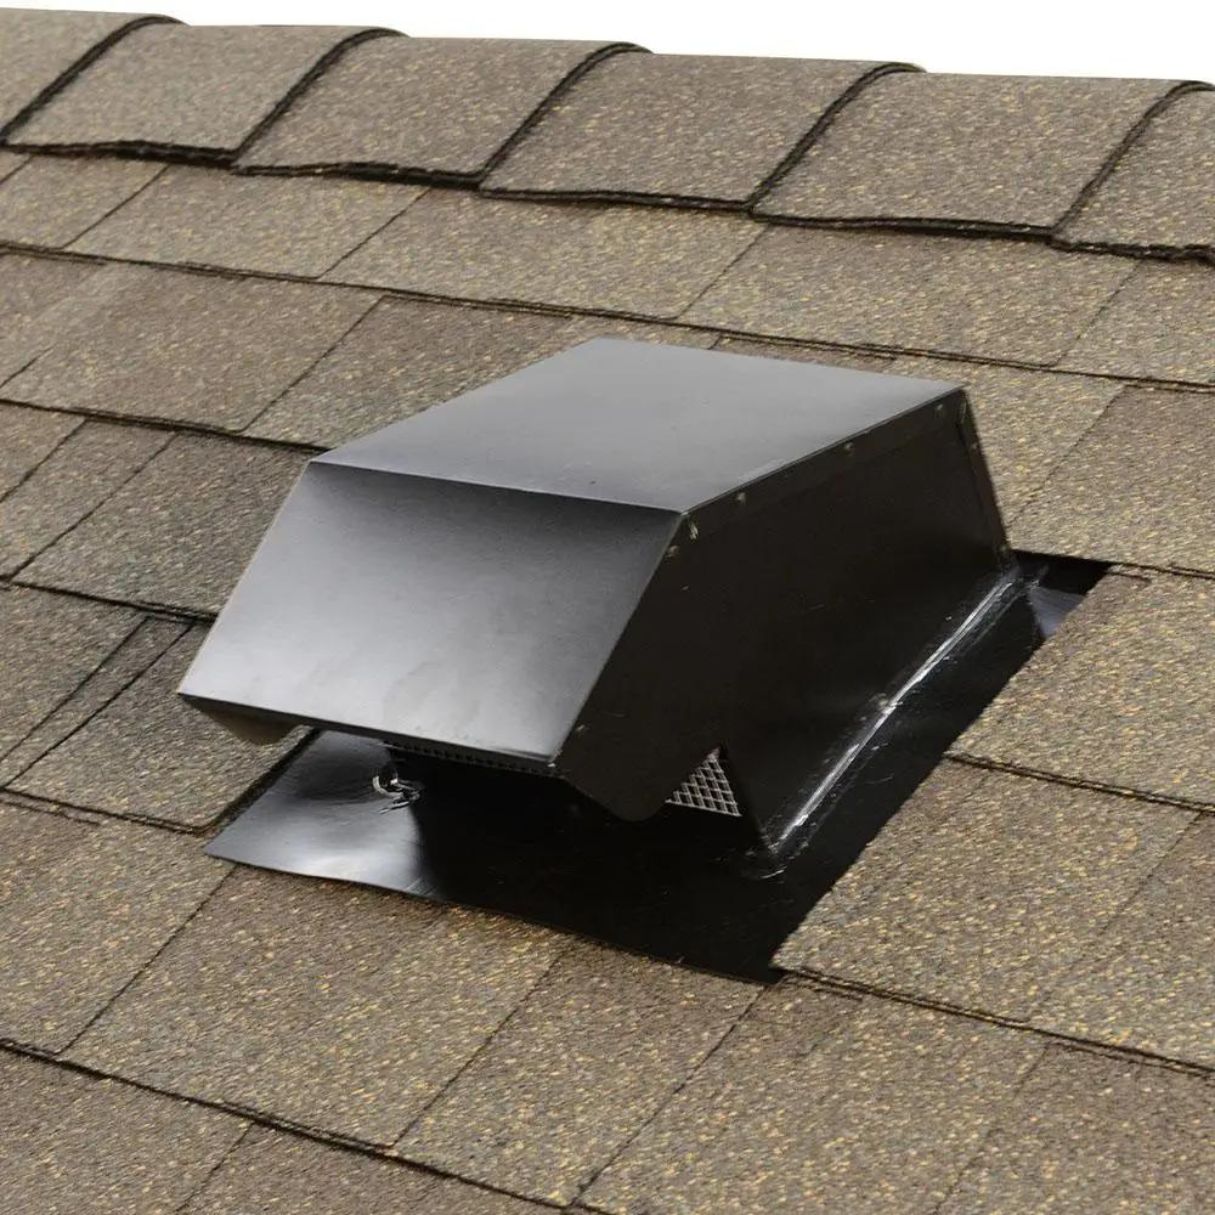 How To Install A Range Hood Vent Through Roof